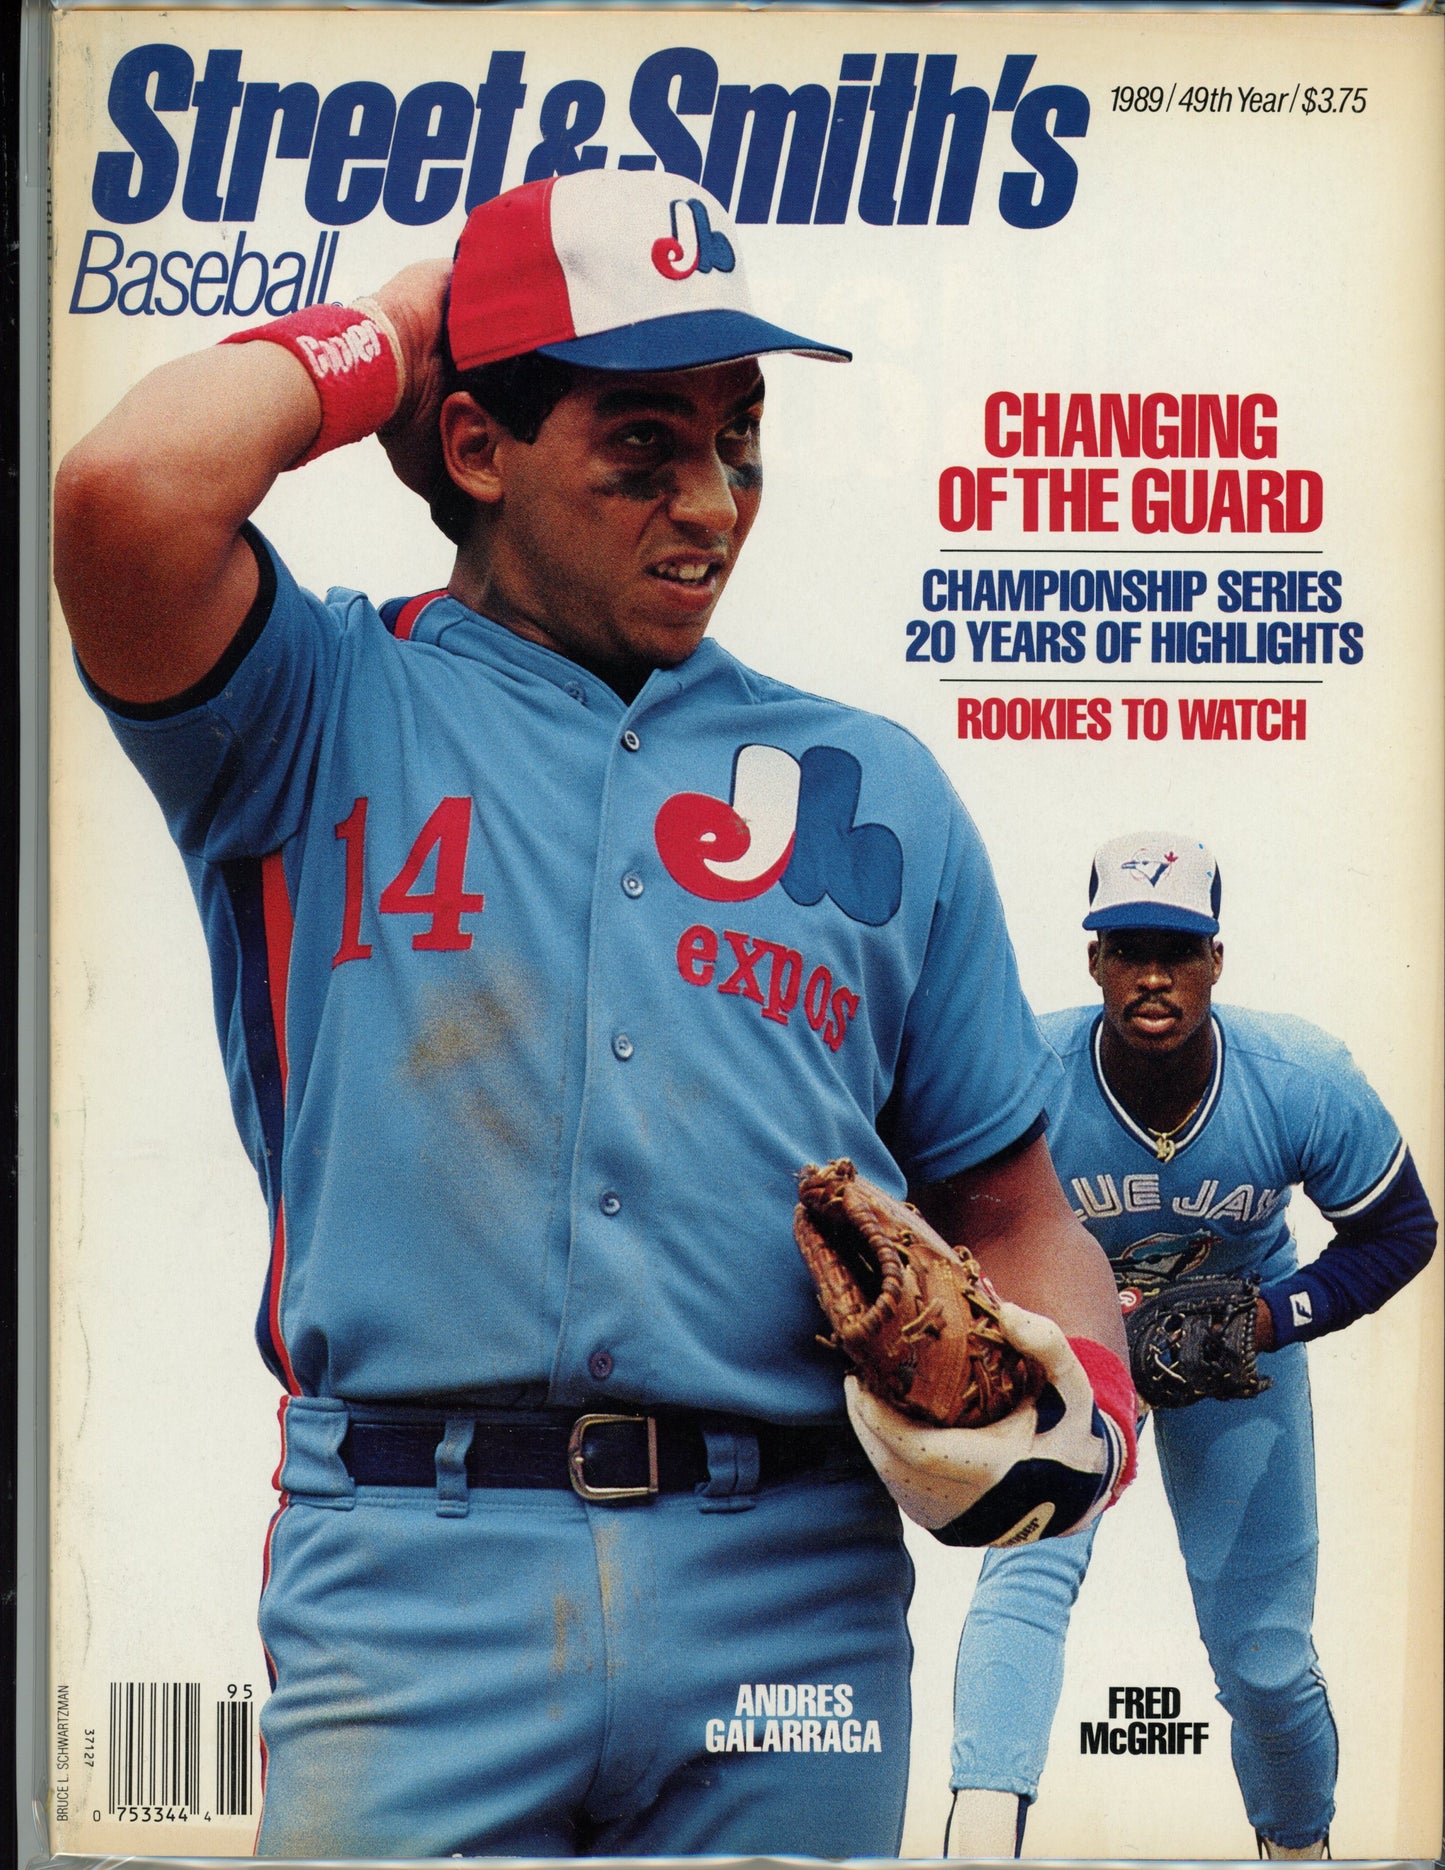 Street And Smith's Vintage Baseball Magazine (1989 Yearbook) Blue Jays, Expos